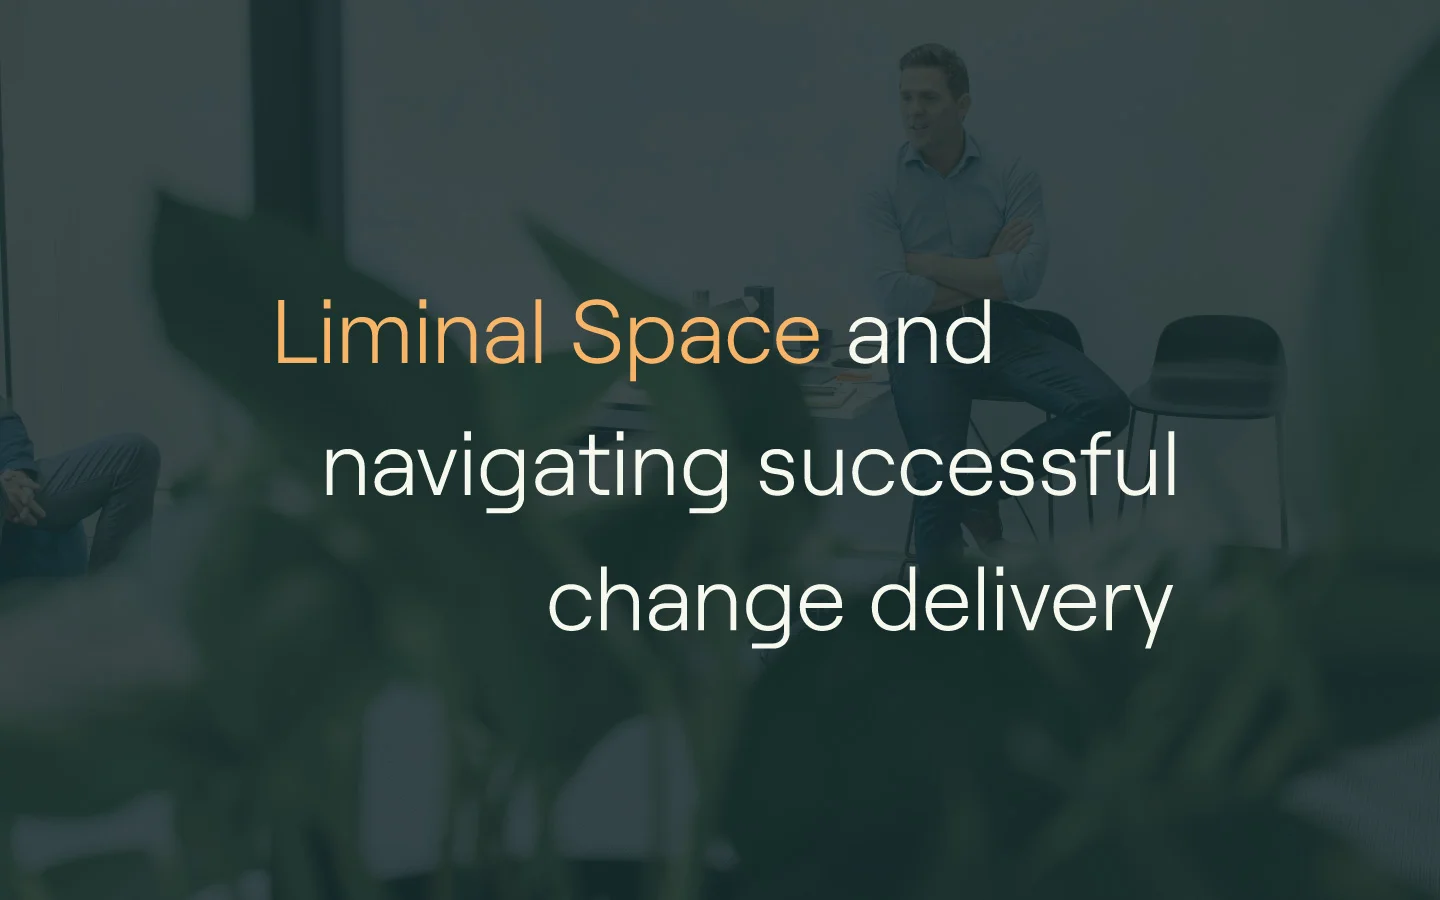 Liminal space and navigating successful business change delivery